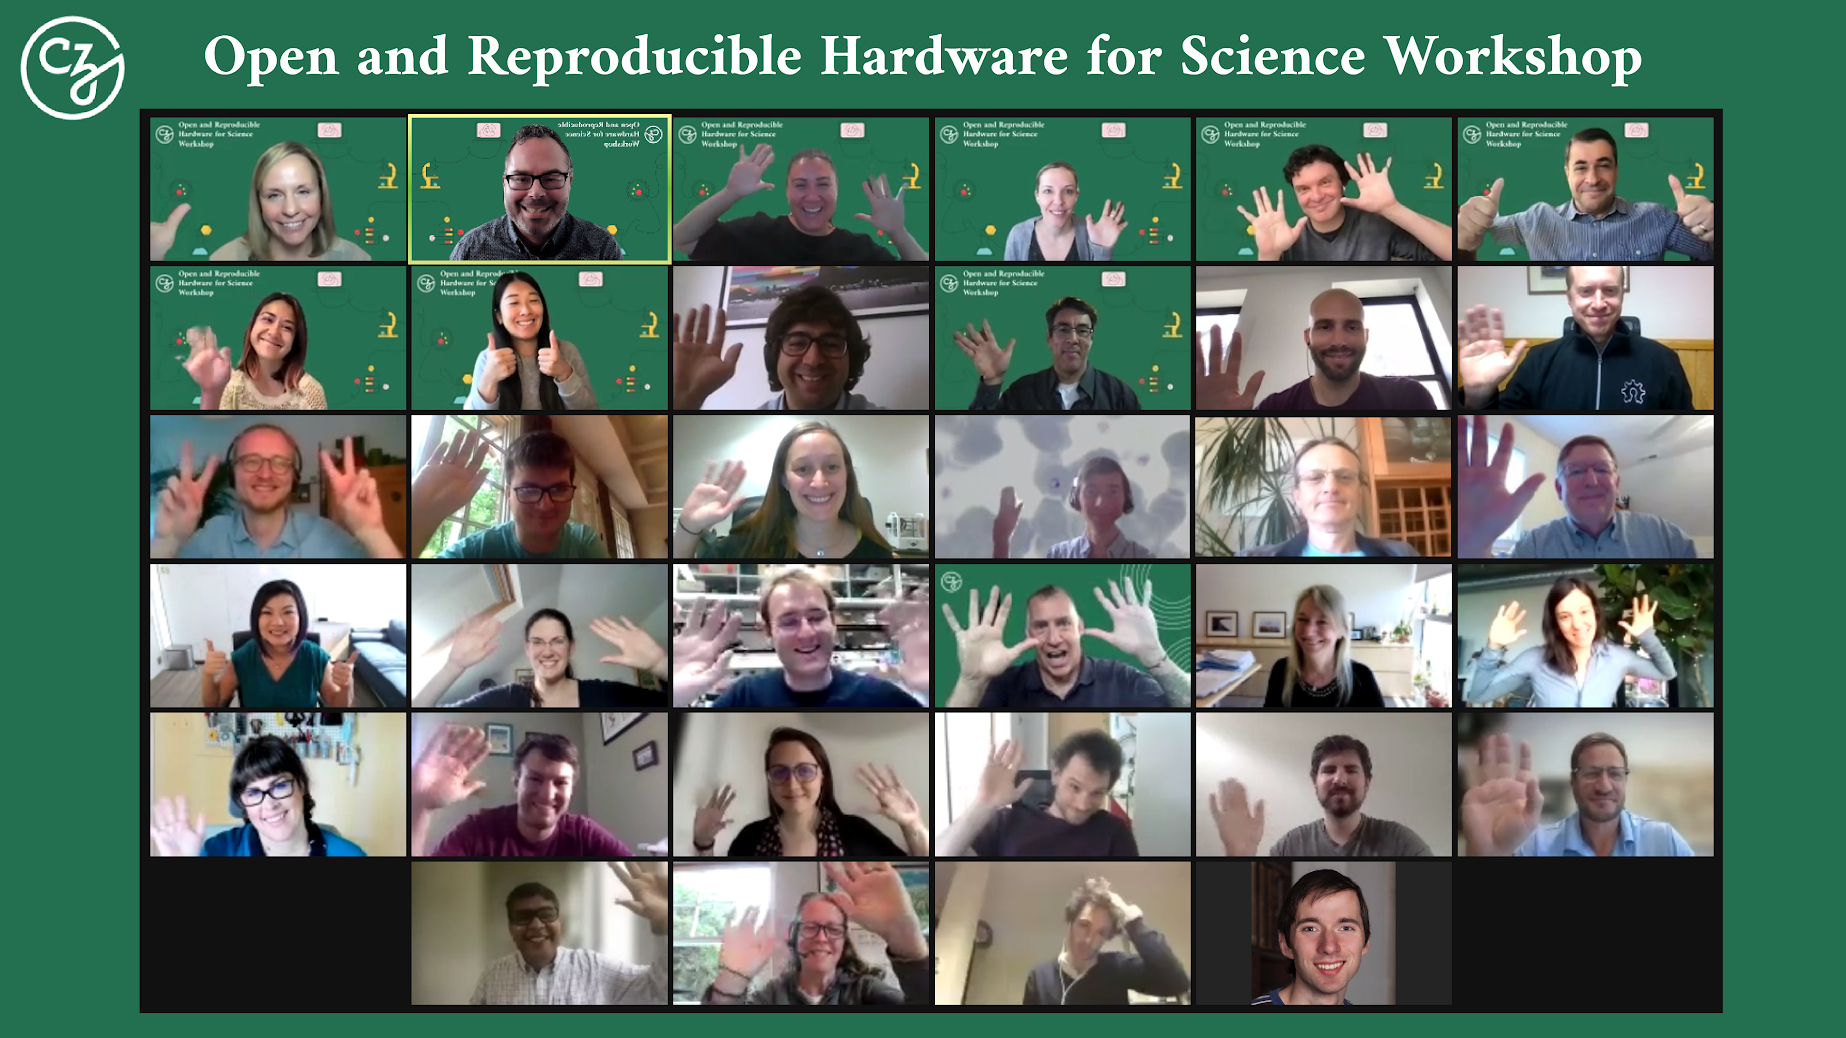 Participants at CZI’s virtual Open and Reproducible Hardware for Science Workshop pose waving on the Zoom platform.